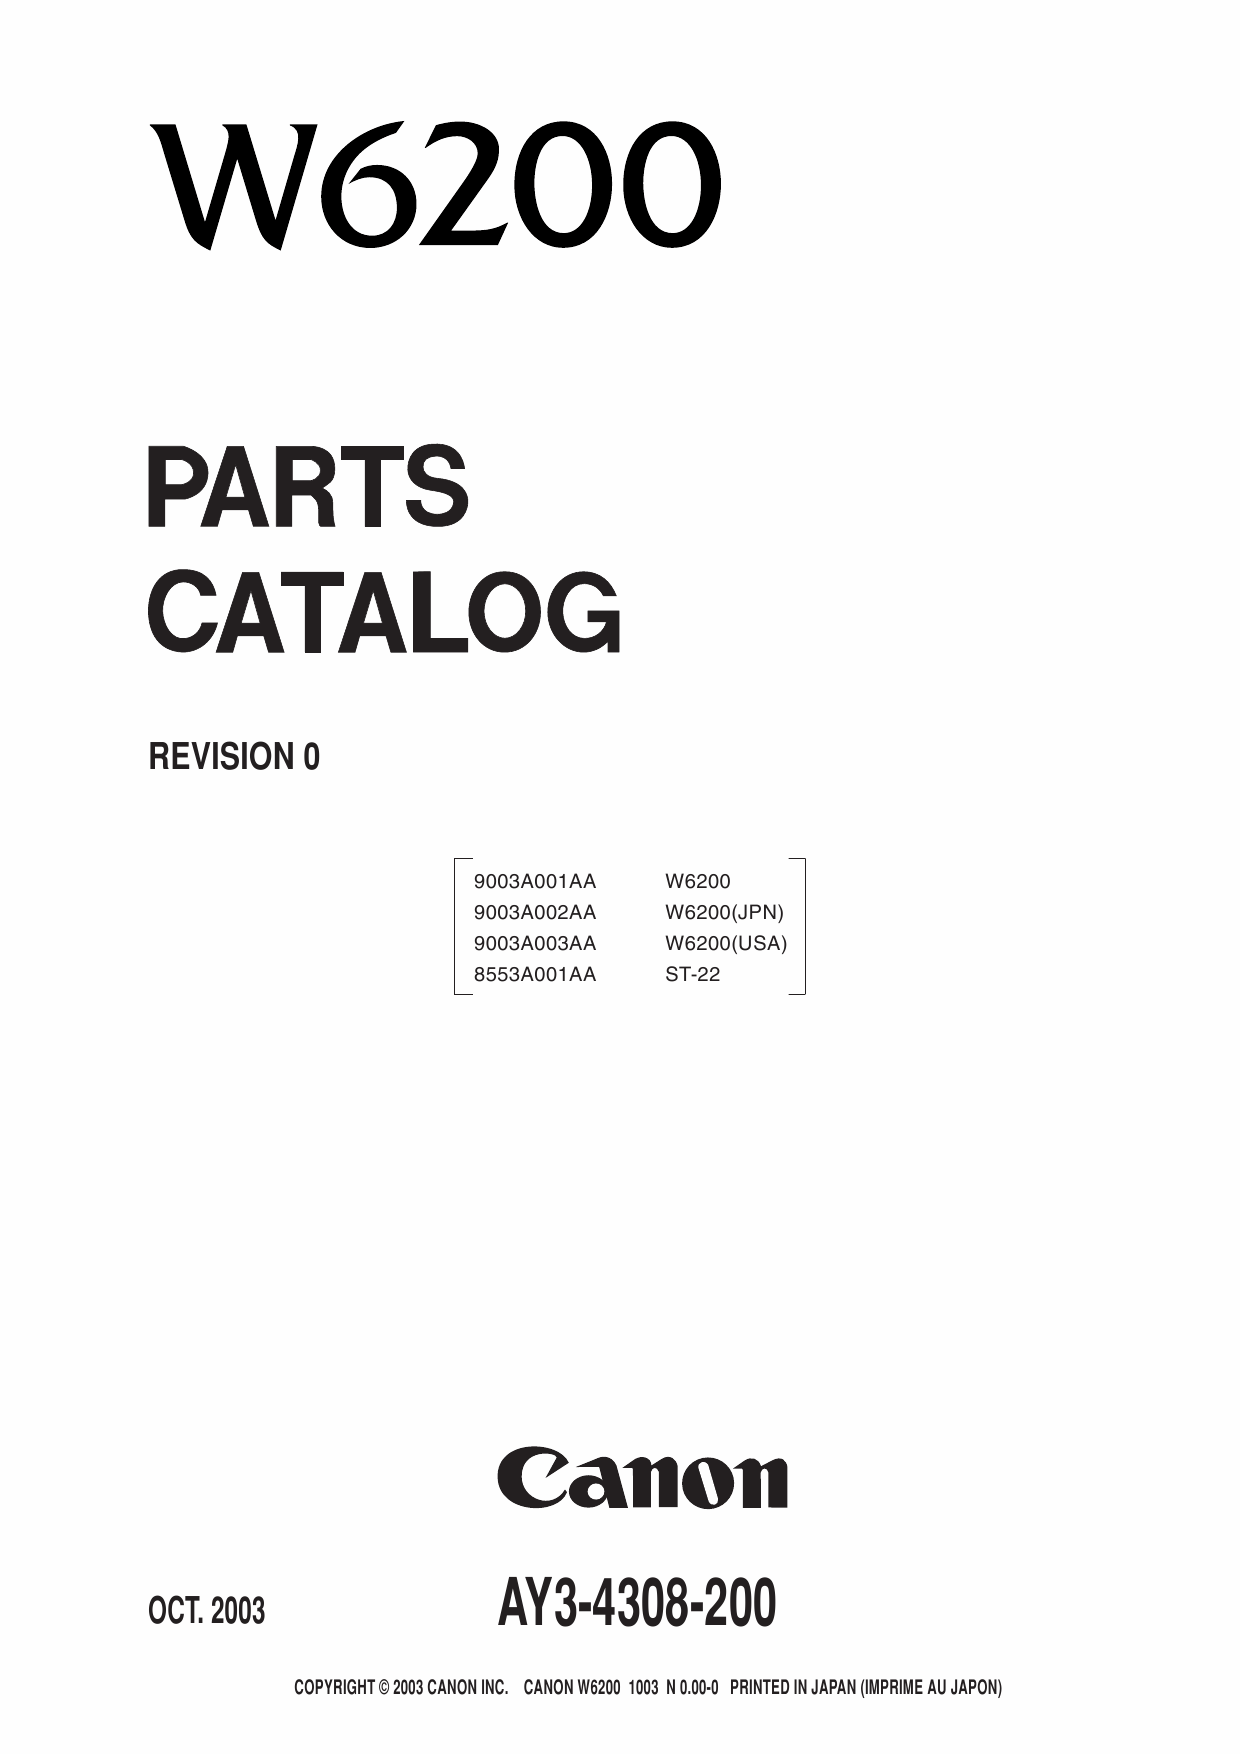 Canon Wide-Format-InkJet W6200 Parts Catalog Manual-1